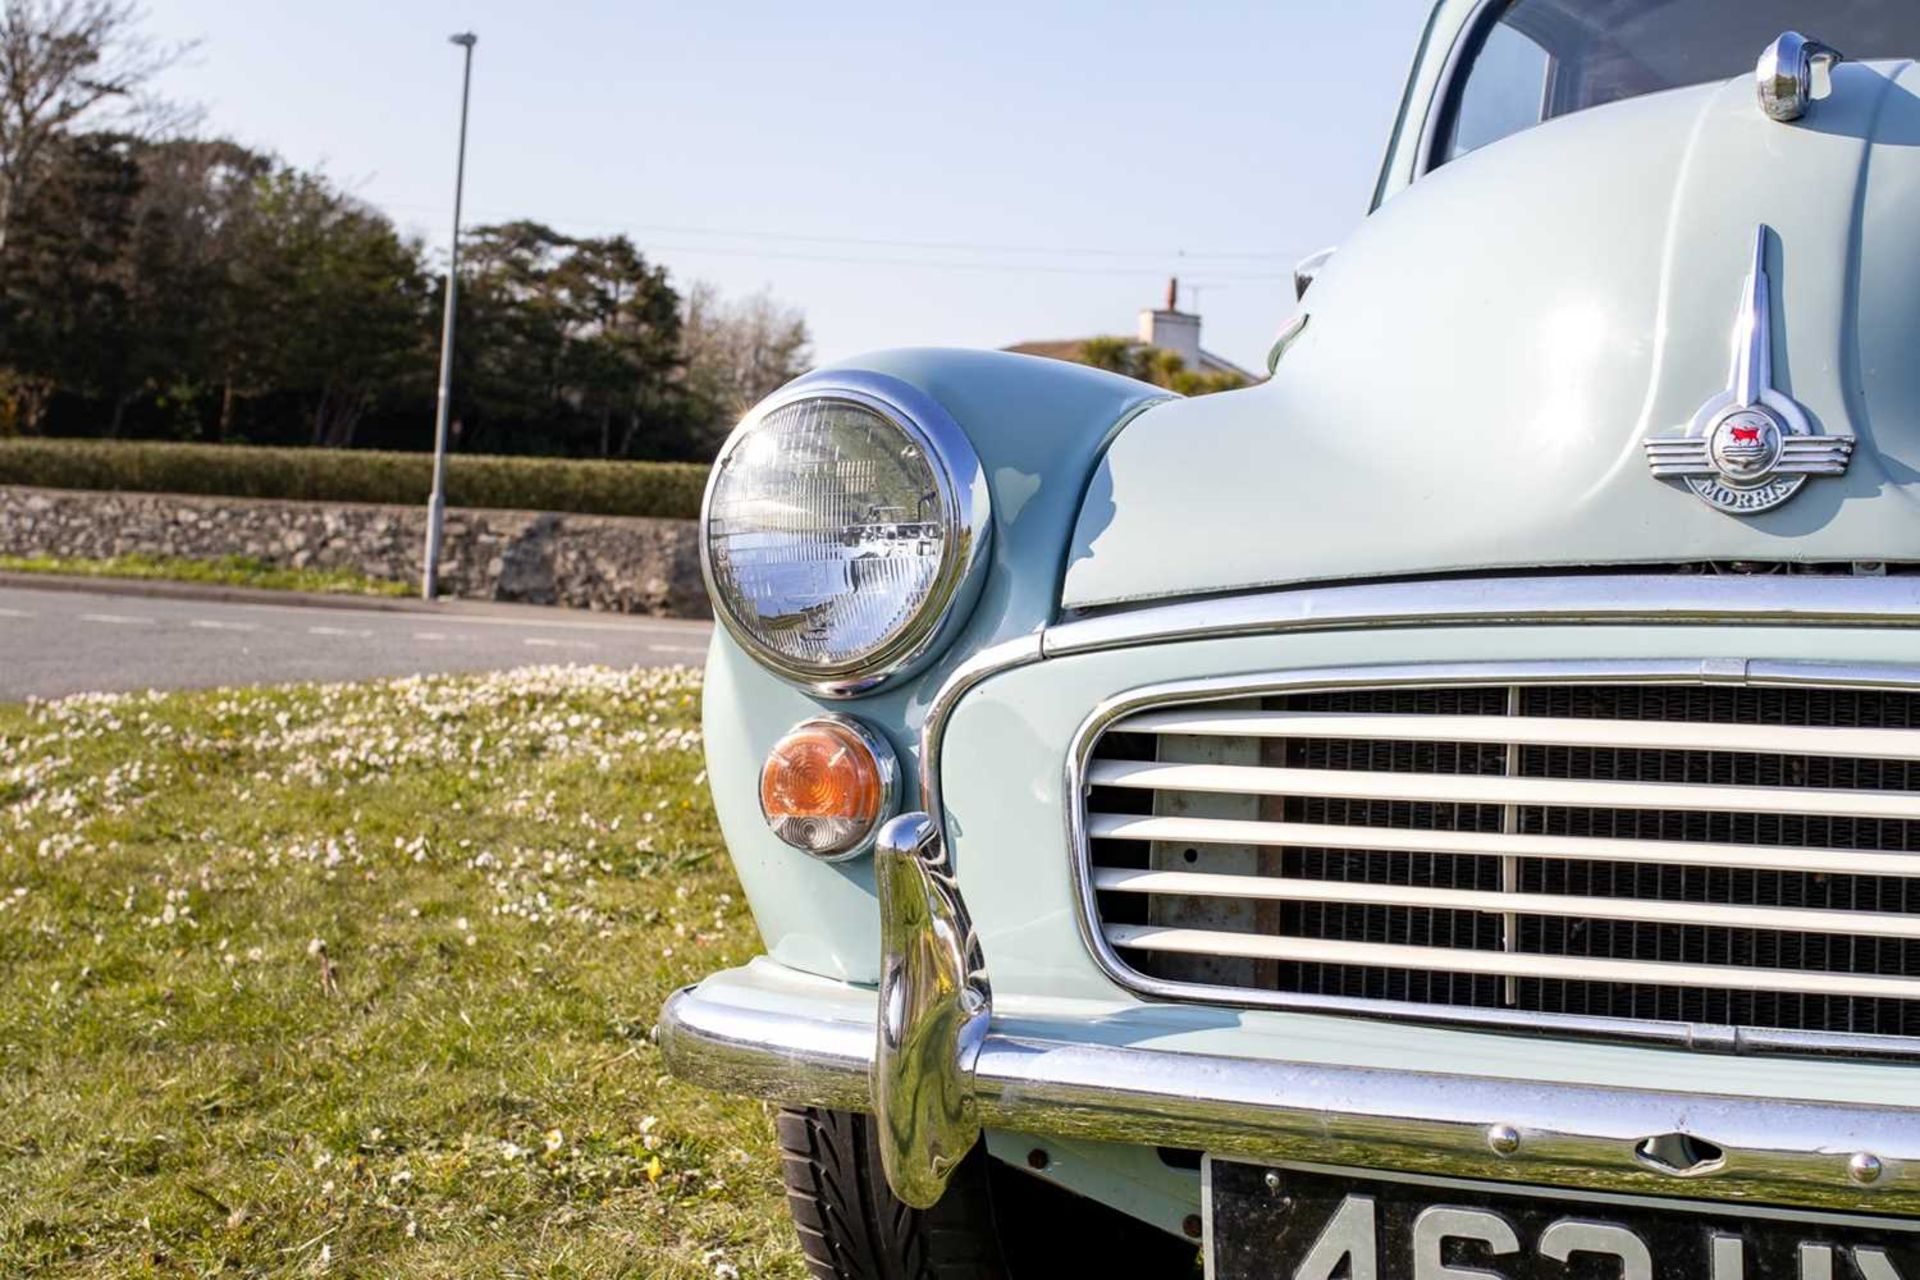 1956 Morris Minor Traveller Uprated with 1275cc engine  - Image 27 of 89